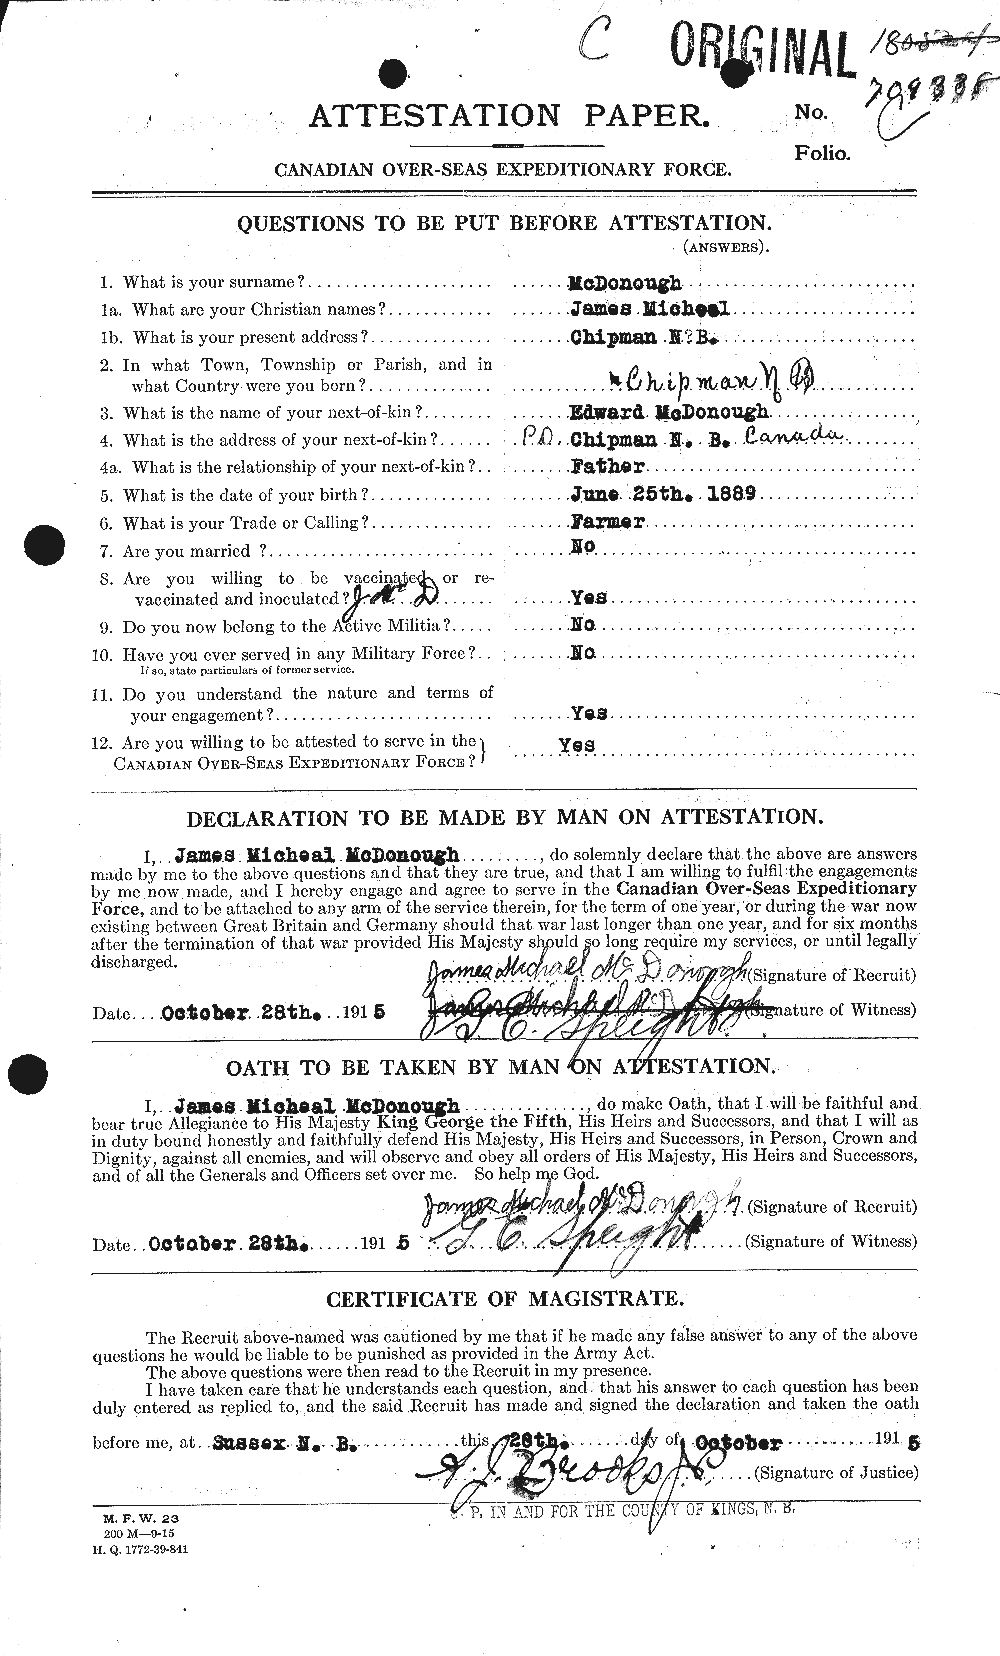 Personnel Records of the First World War - CEF 525113a